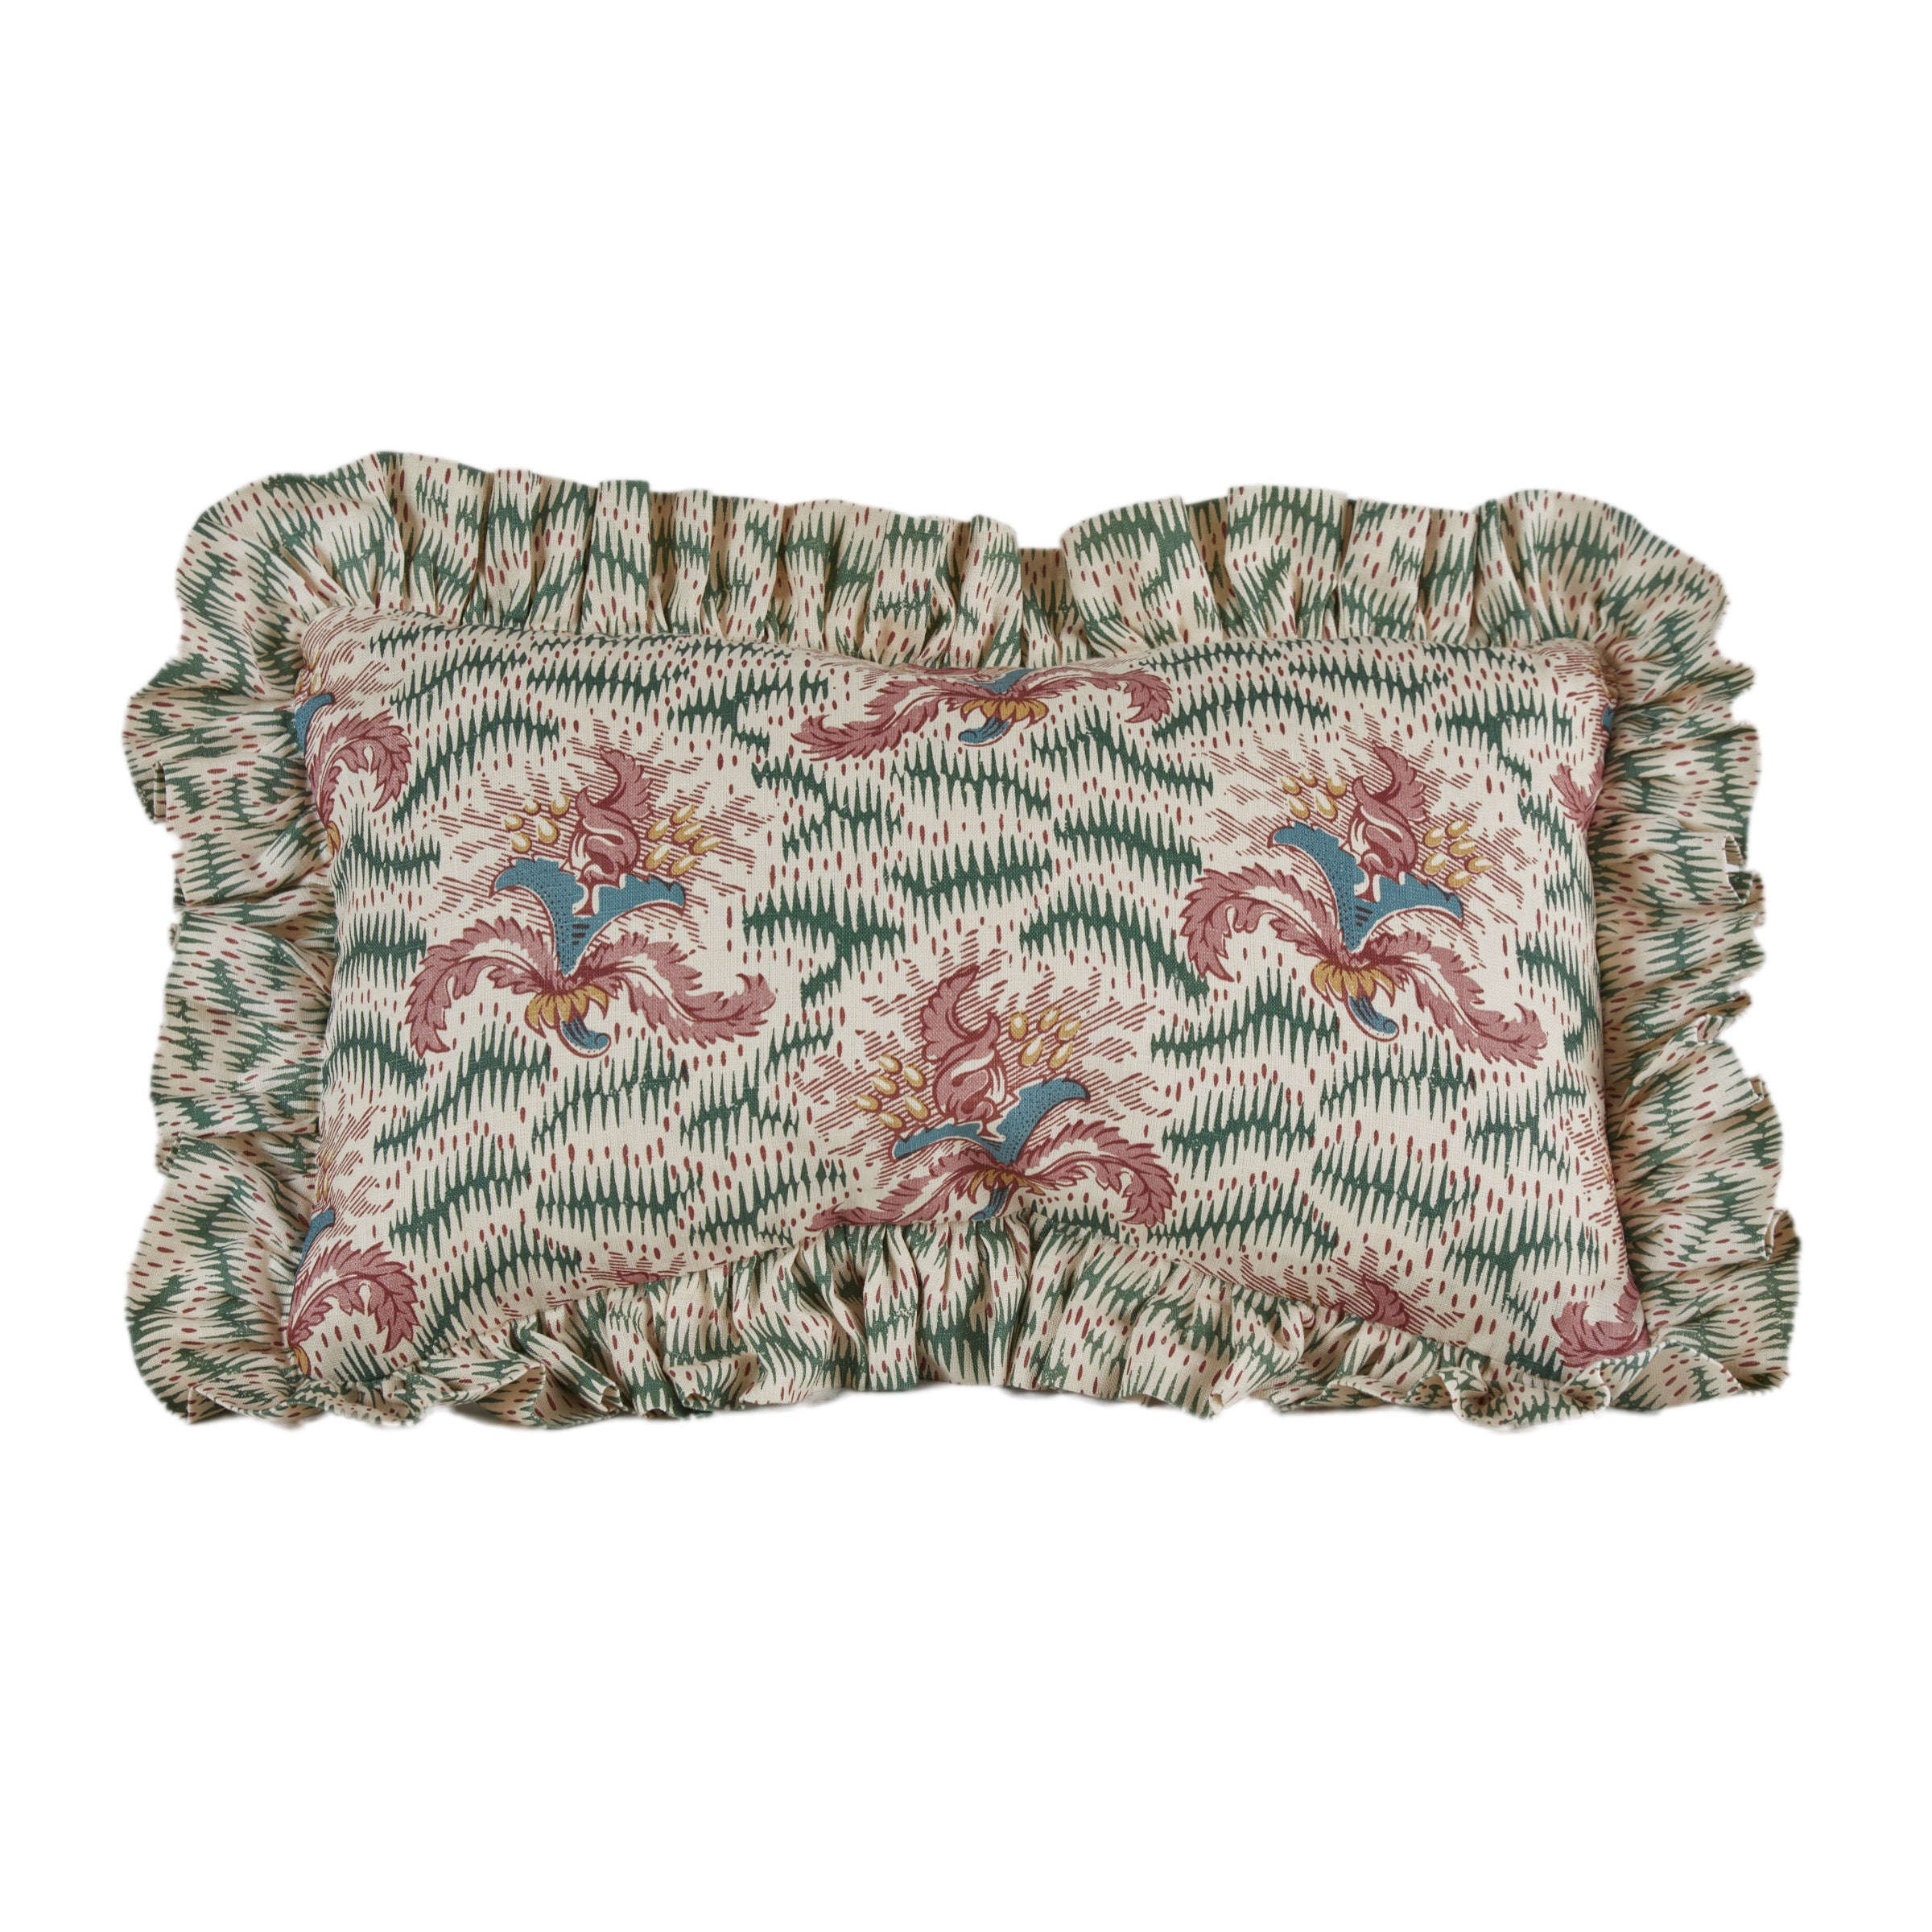 Daphne Emerald and Old Rose Cushion with a Daphne's Feathers Emerald Gathered Frill